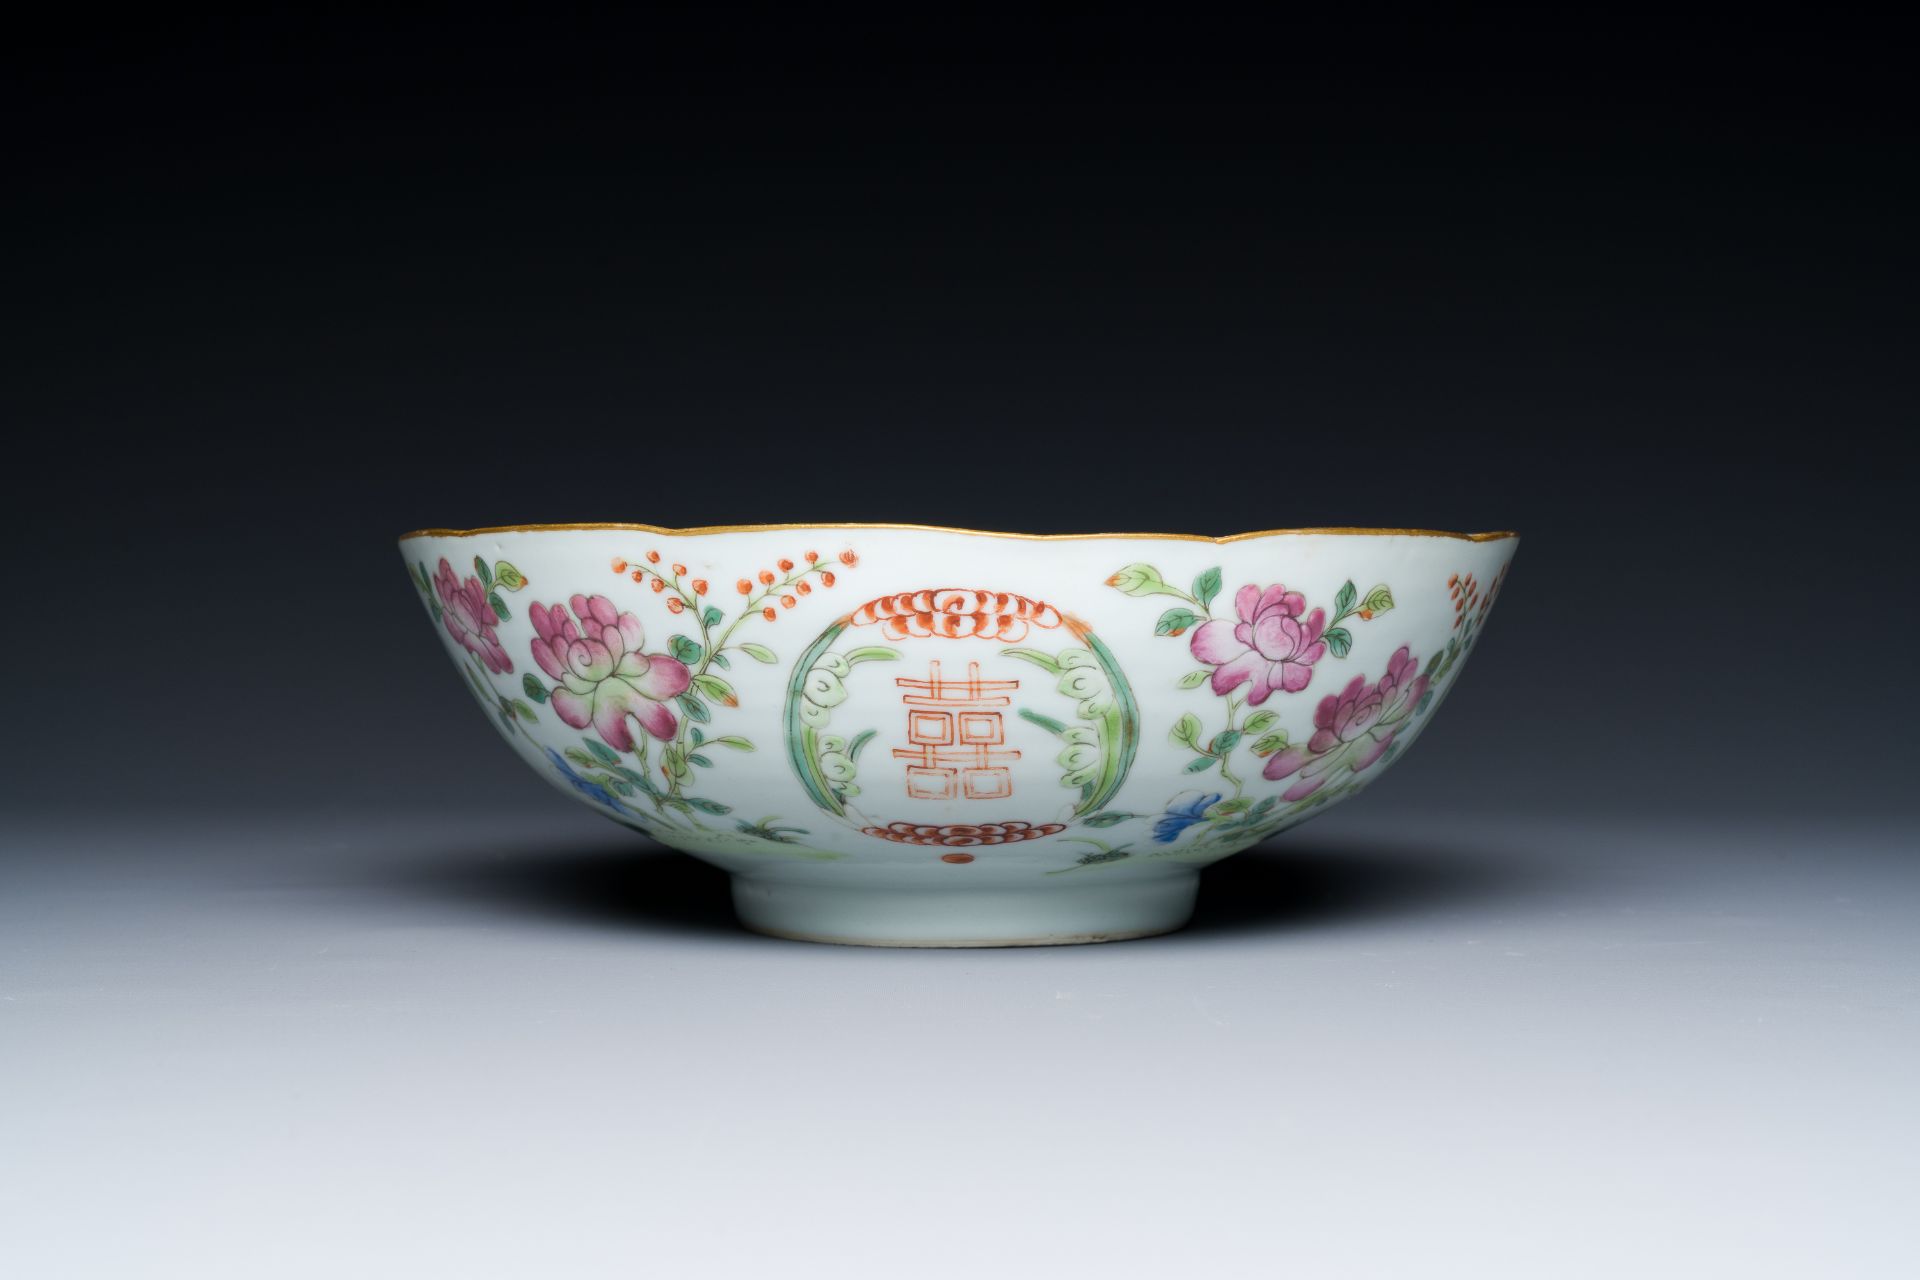 A varied collection of Chinese porcelain, 19/20th C. - Image 7 of 15